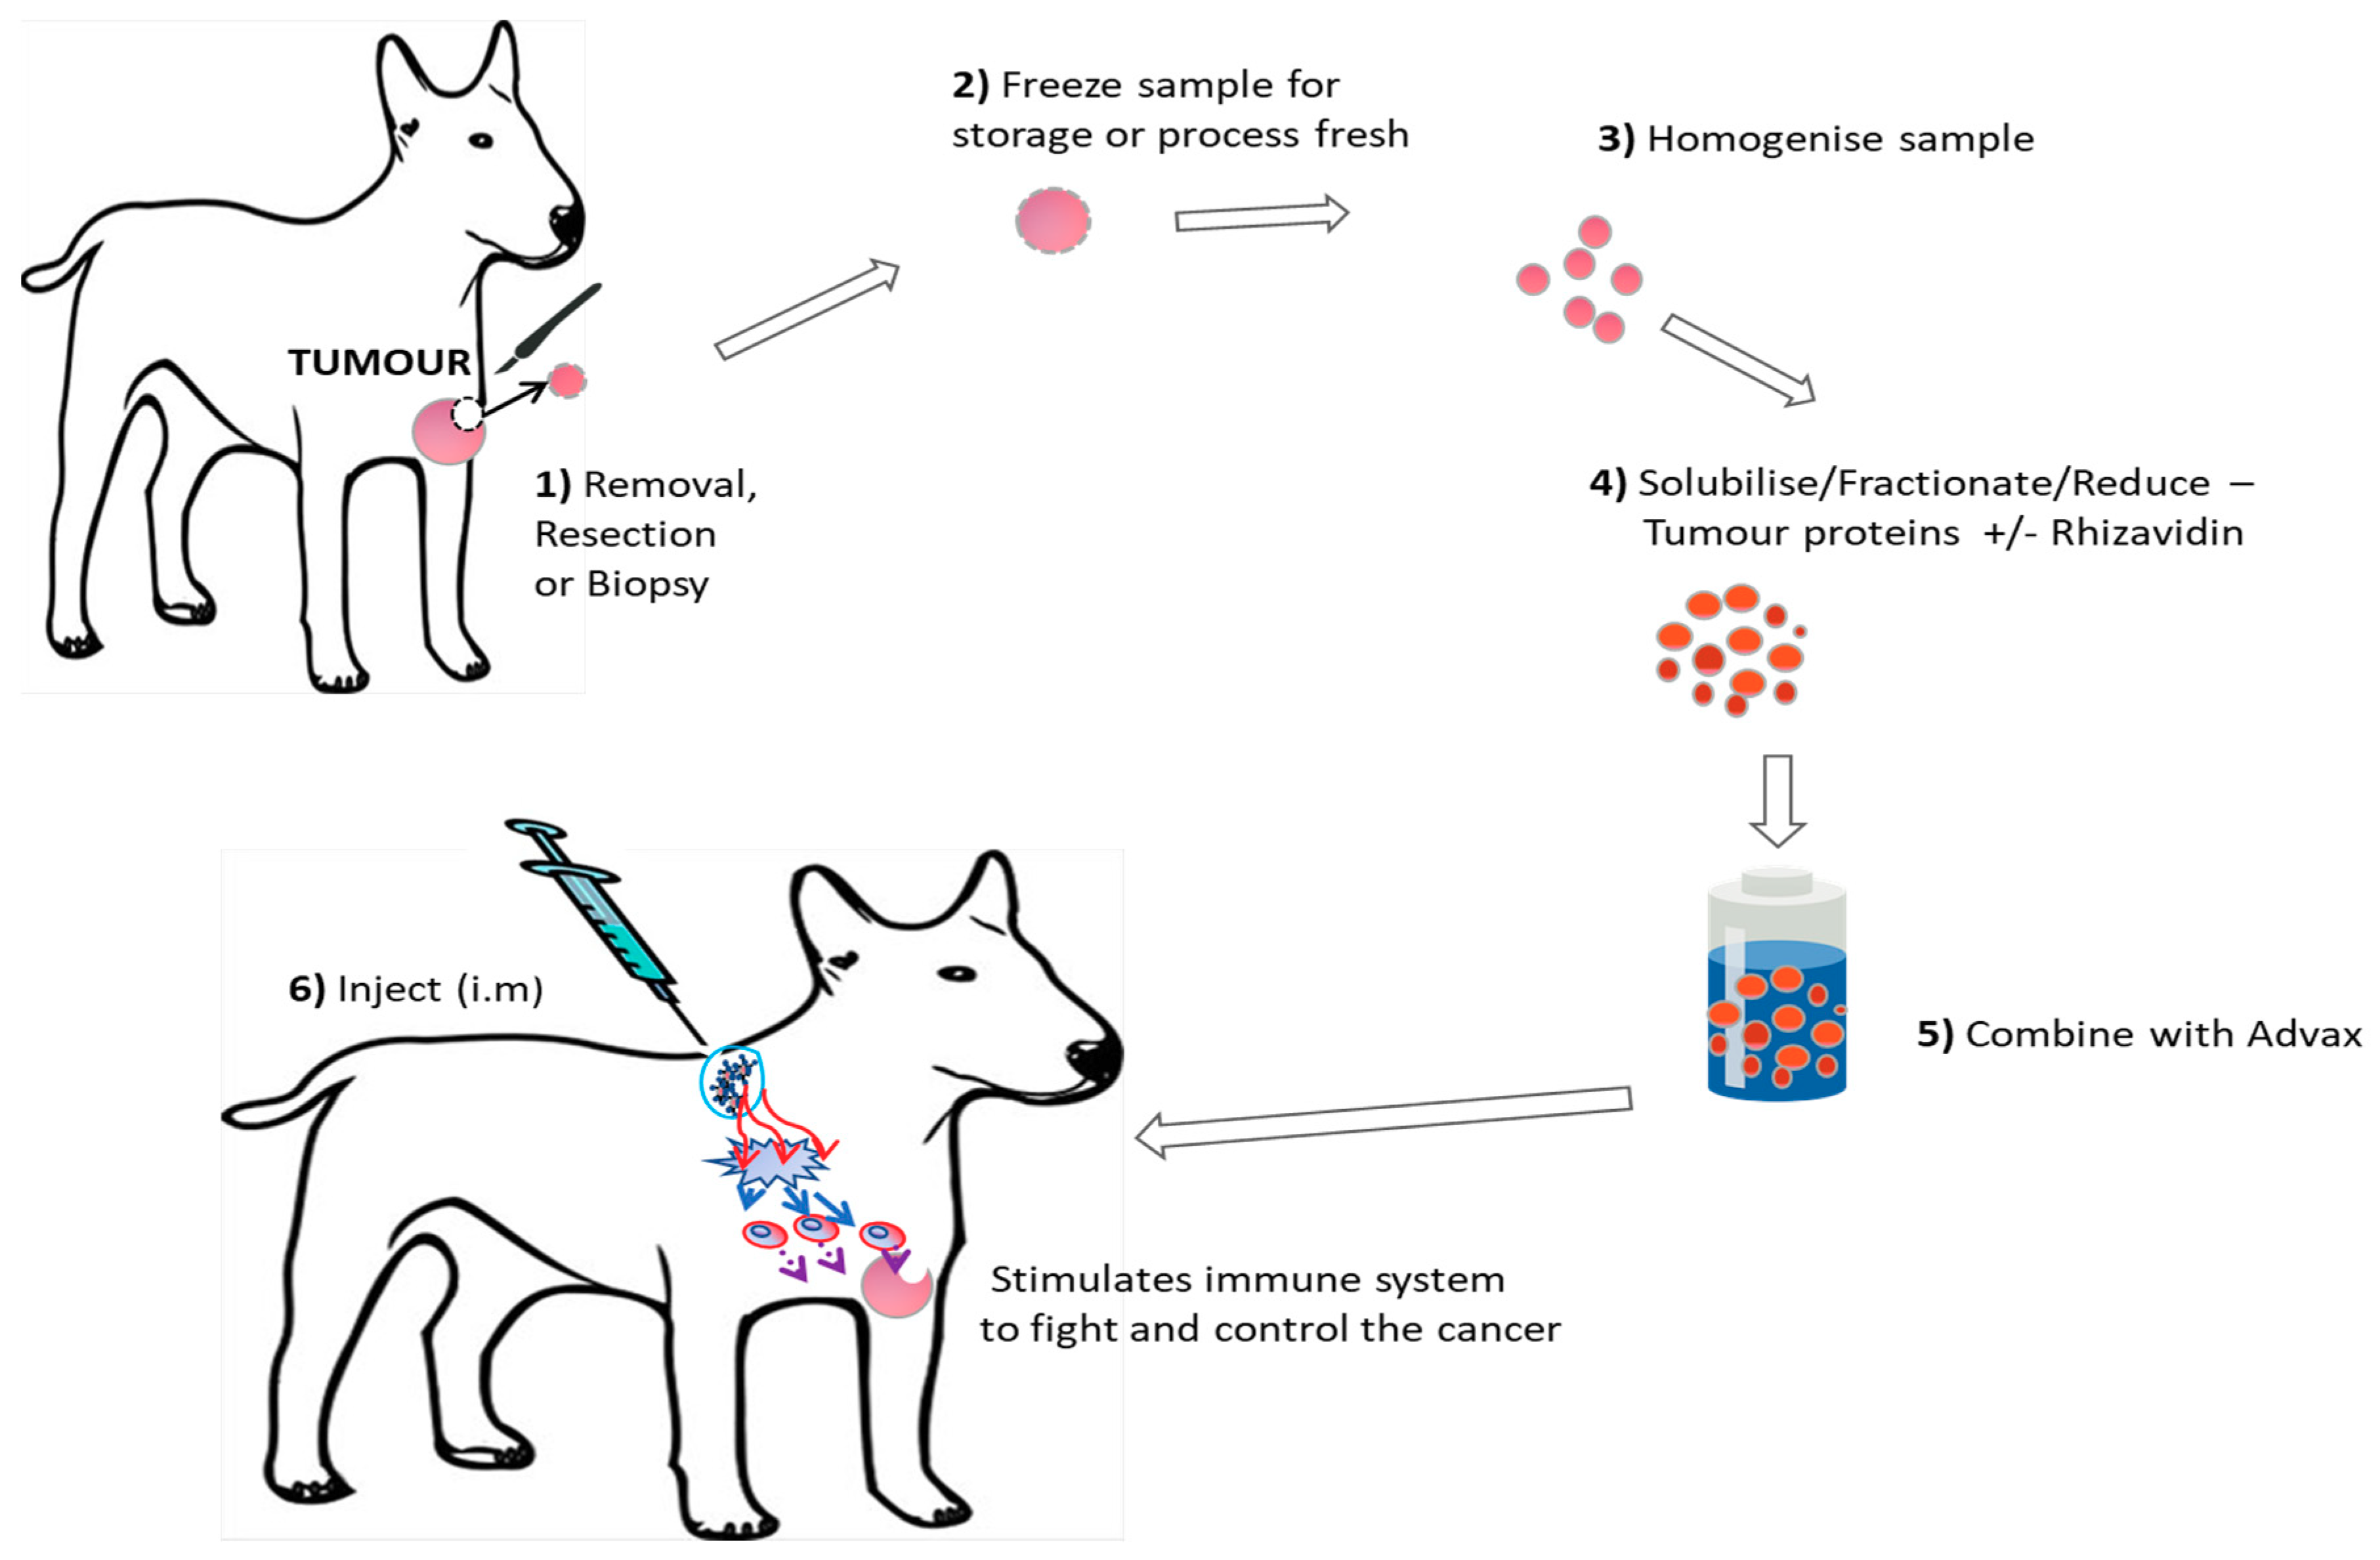 what is dog 5in1 vaccine